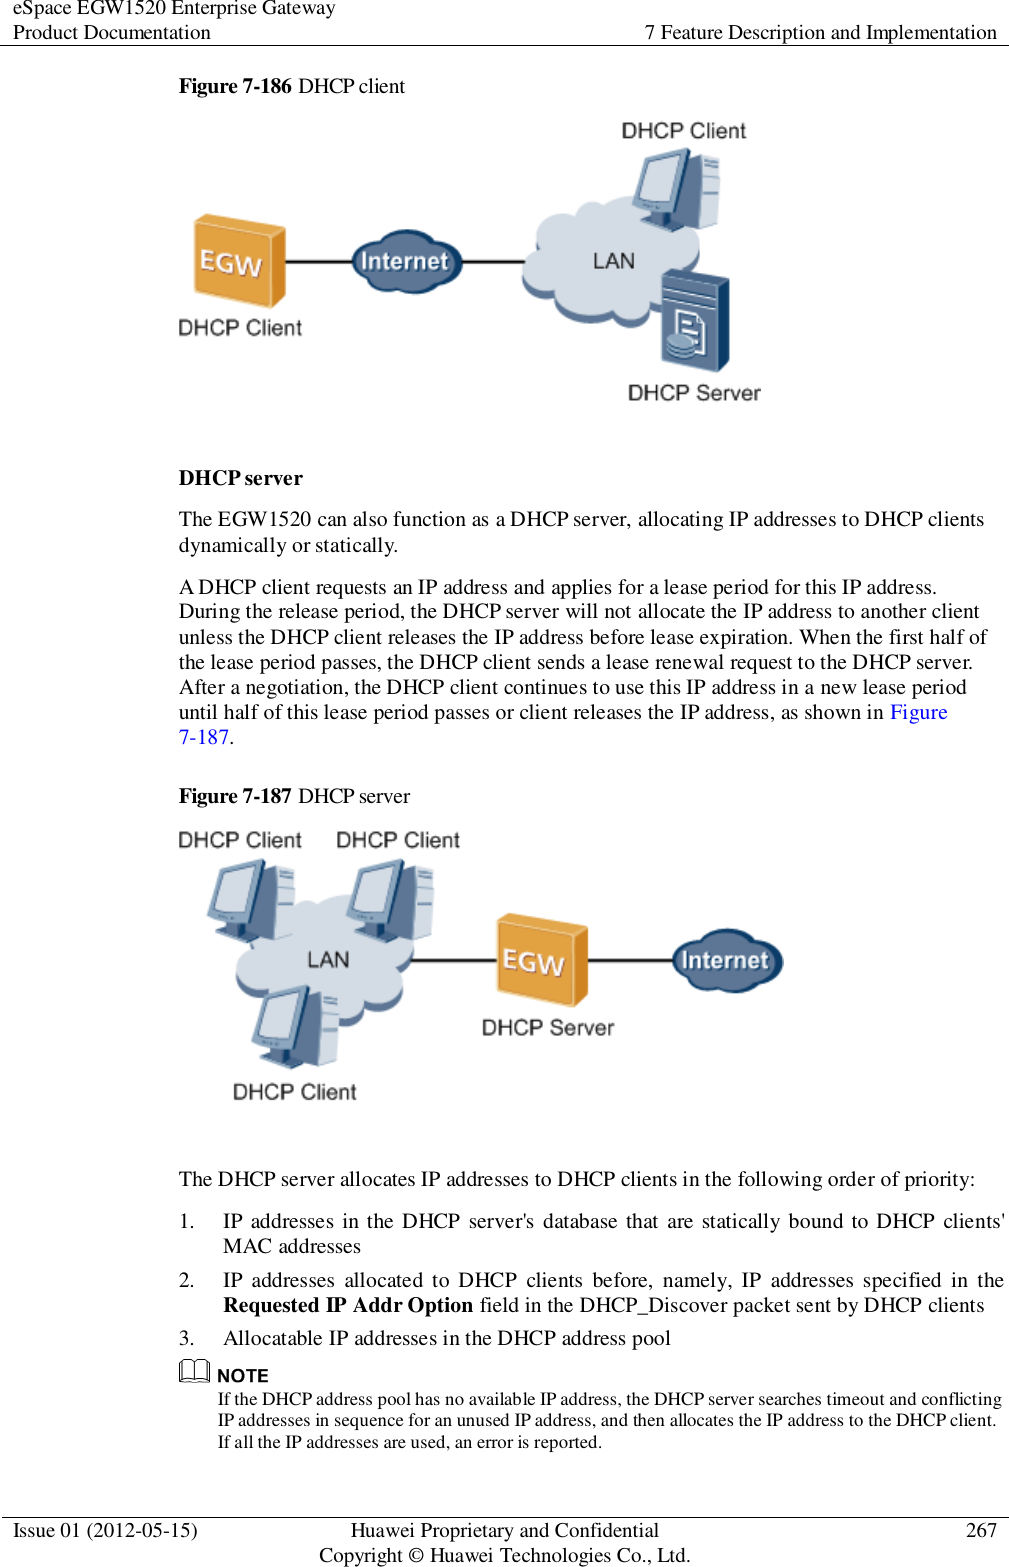 eSpace EGW1520 Enterprise Gateway Product Documentation 7 Feature Description and Implementation  Issue 01 (2012-05-15) Huawei Proprietary and Confidential                                     Copyright © Huawei Technologies Co., Ltd. 267  Figure 7-186 DHCP client   DHCP server The EGW1520 can also function as a DHCP server, allocating IP addresses to DHCP clients dynamically or statically. A DHCP client requests an IP address and applies for a lease period for this IP address. During the release period, the DHCP server will not allocate the IP address to another client unless the DHCP client releases the IP address before lease expiration. When the first half of the lease period passes, the DHCP client sends a lease renewal request to the DHCP server. After a negotiation, the DHCP client continues to use this IP address in a new lease period until half of this lease period passes or client releases the IP address, as shown in Figure 7-187. Figure 7-187 DHCP server   The DHCP server allocates IP addresses to DHCP clients in the following order of priority: 1. IP addresses in the DHCP server&apos;s  database that  are statically bound to DHCP clients&apos; MAC addresses 2. IP  addresses  allocated  to DHCP  clients  before,  namely,  IP  addresses specified  in  the Requested IP Addr Option field in the DHCP_Discover packet sent by DHCP clients 3. Allocatable IP addresses in the DHCP address pool  If the DHCP address pool has no available IP address, the DHCP server searches timeout and conflicting IP addresses in sequence for an unused IP address, and then allocates the IP address to the DHCP client. If all the IP addresses are used, an error is reported. 